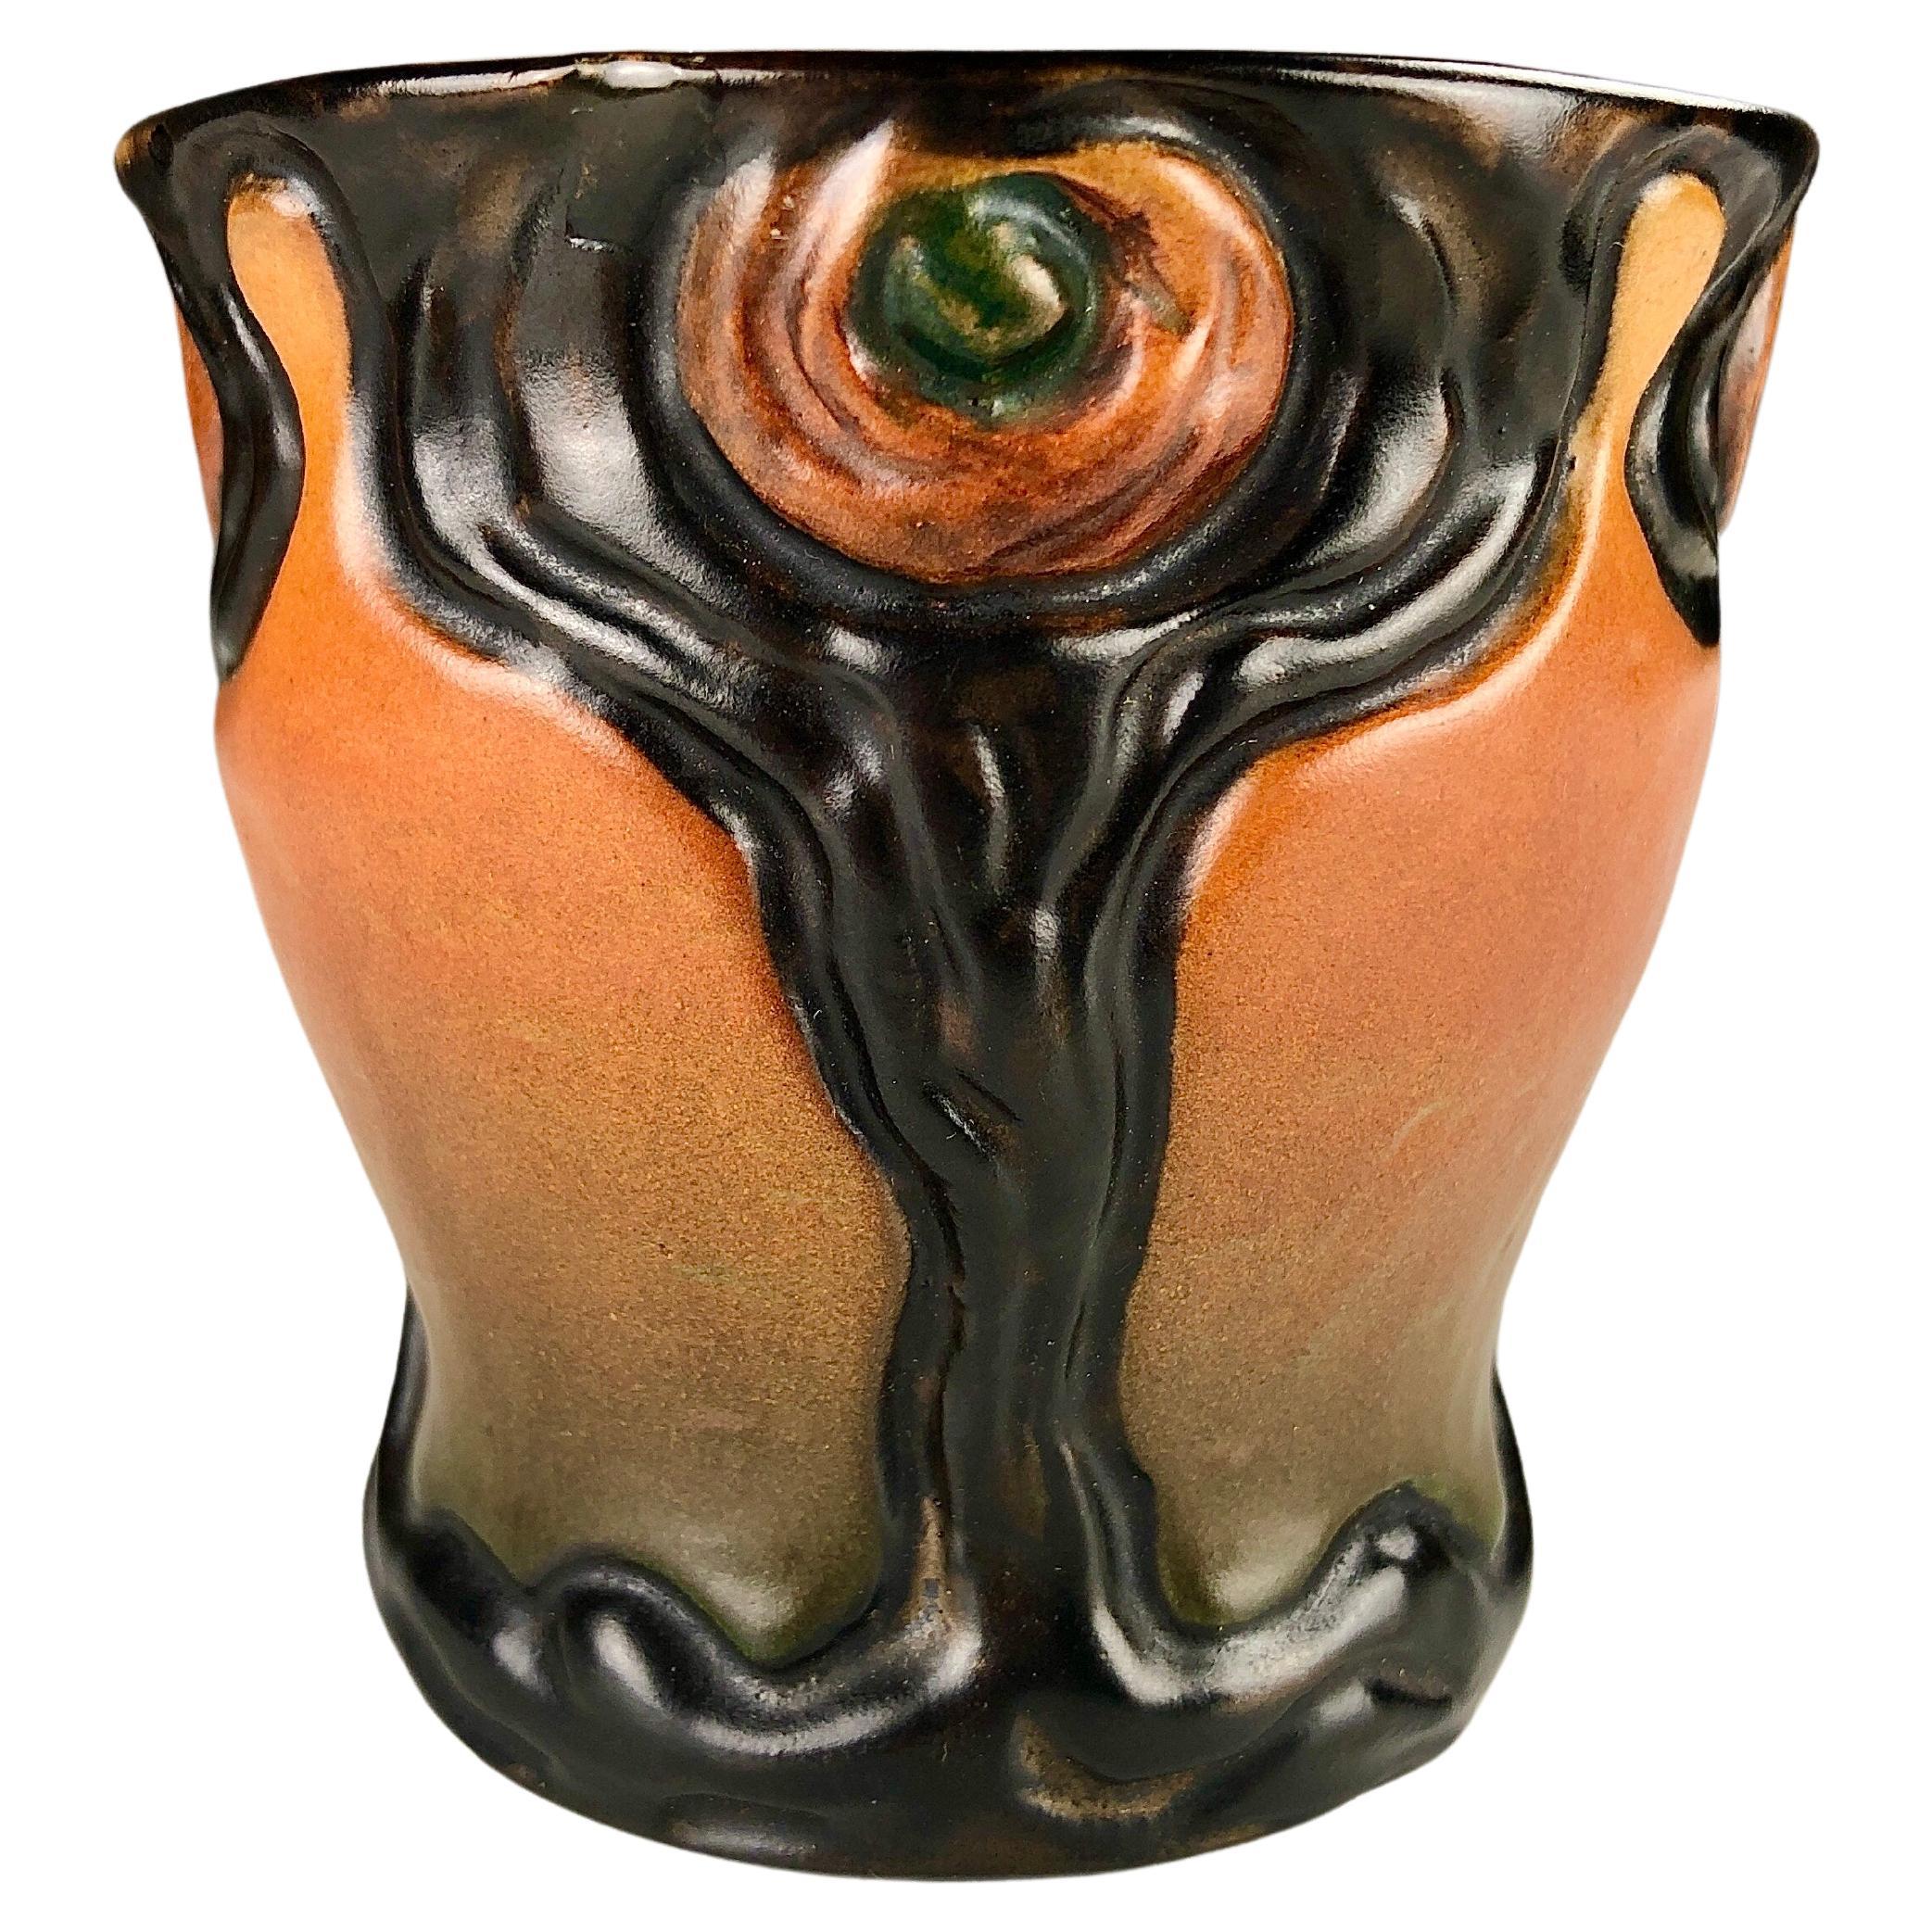 1920's Hand-Crafted Small Danish Art Nouveau Vase or Bowl by P. Ipsens Enke For Sale